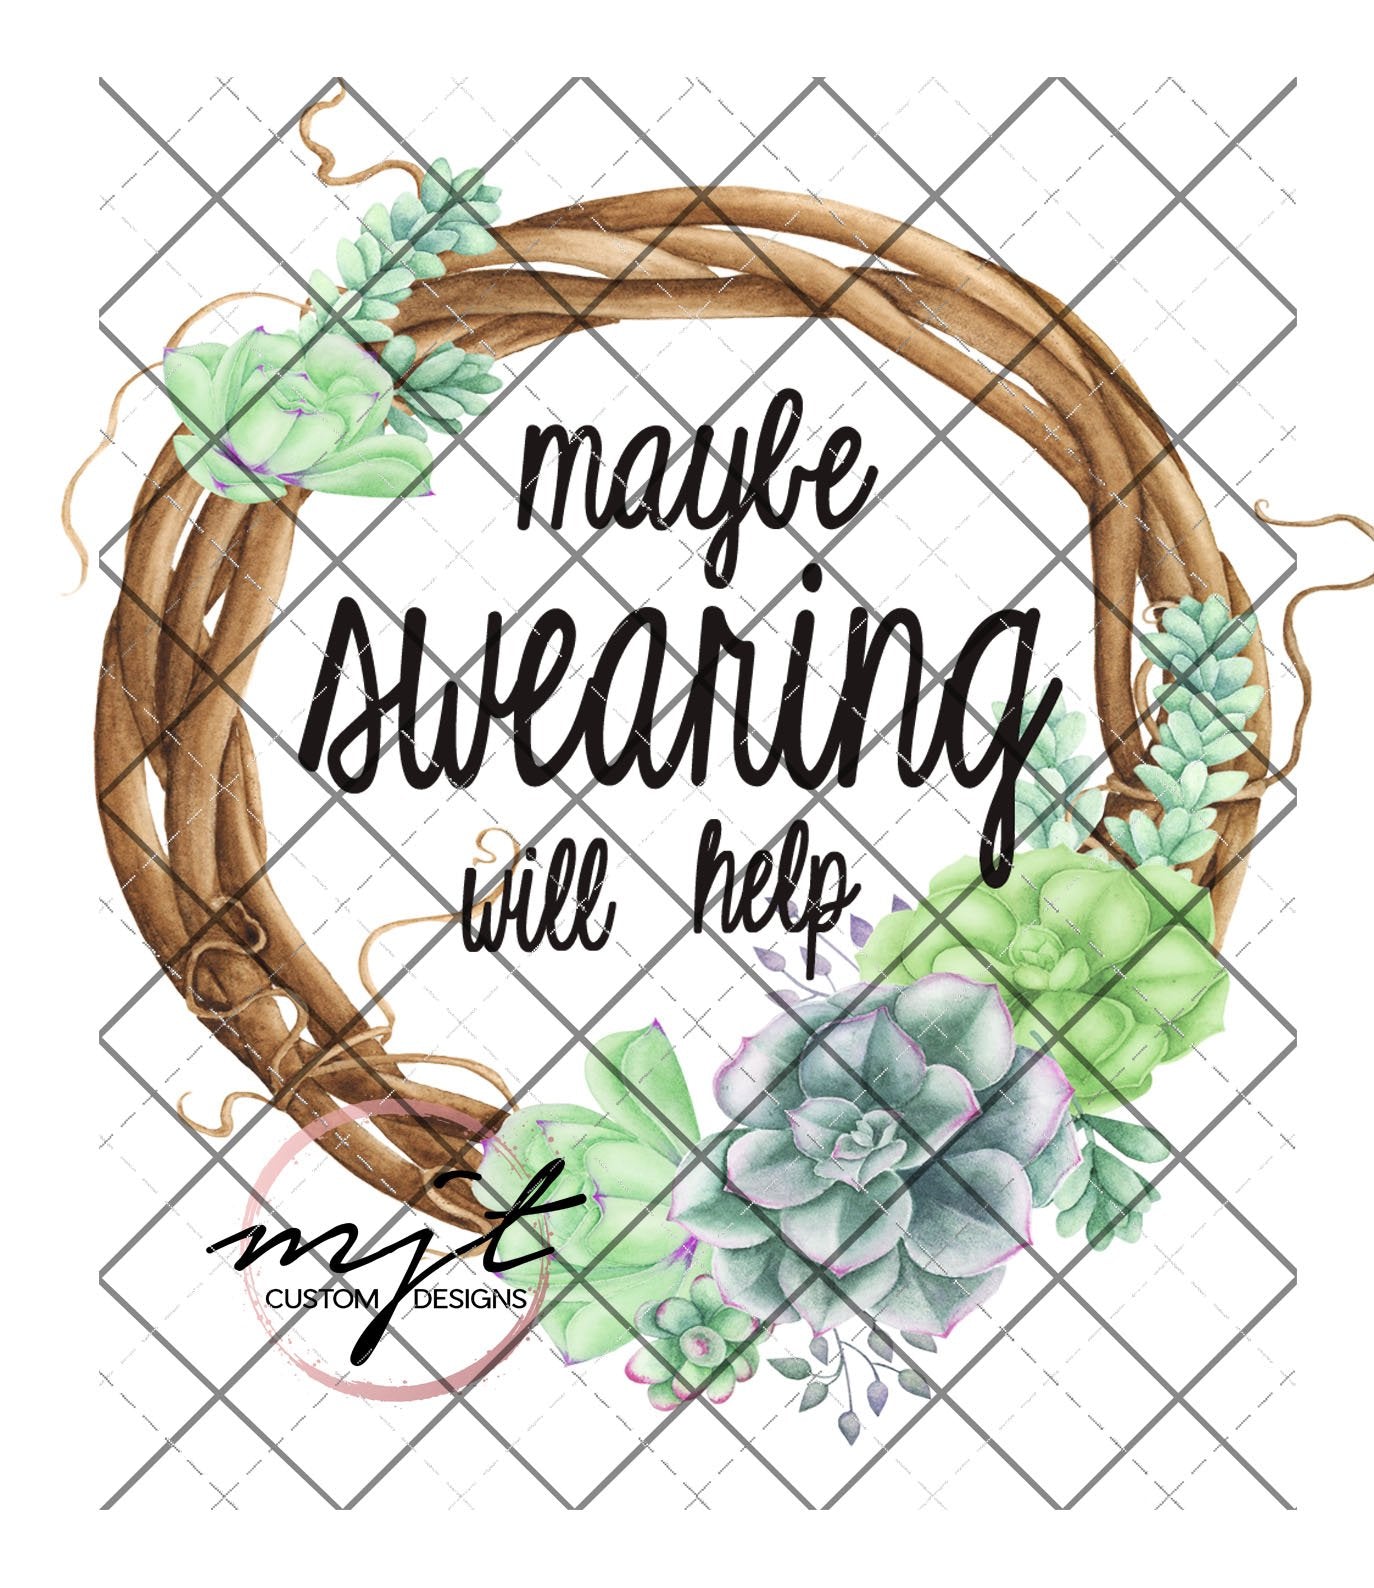 Maybe swearing will Help - Succulent Printed Waterslide